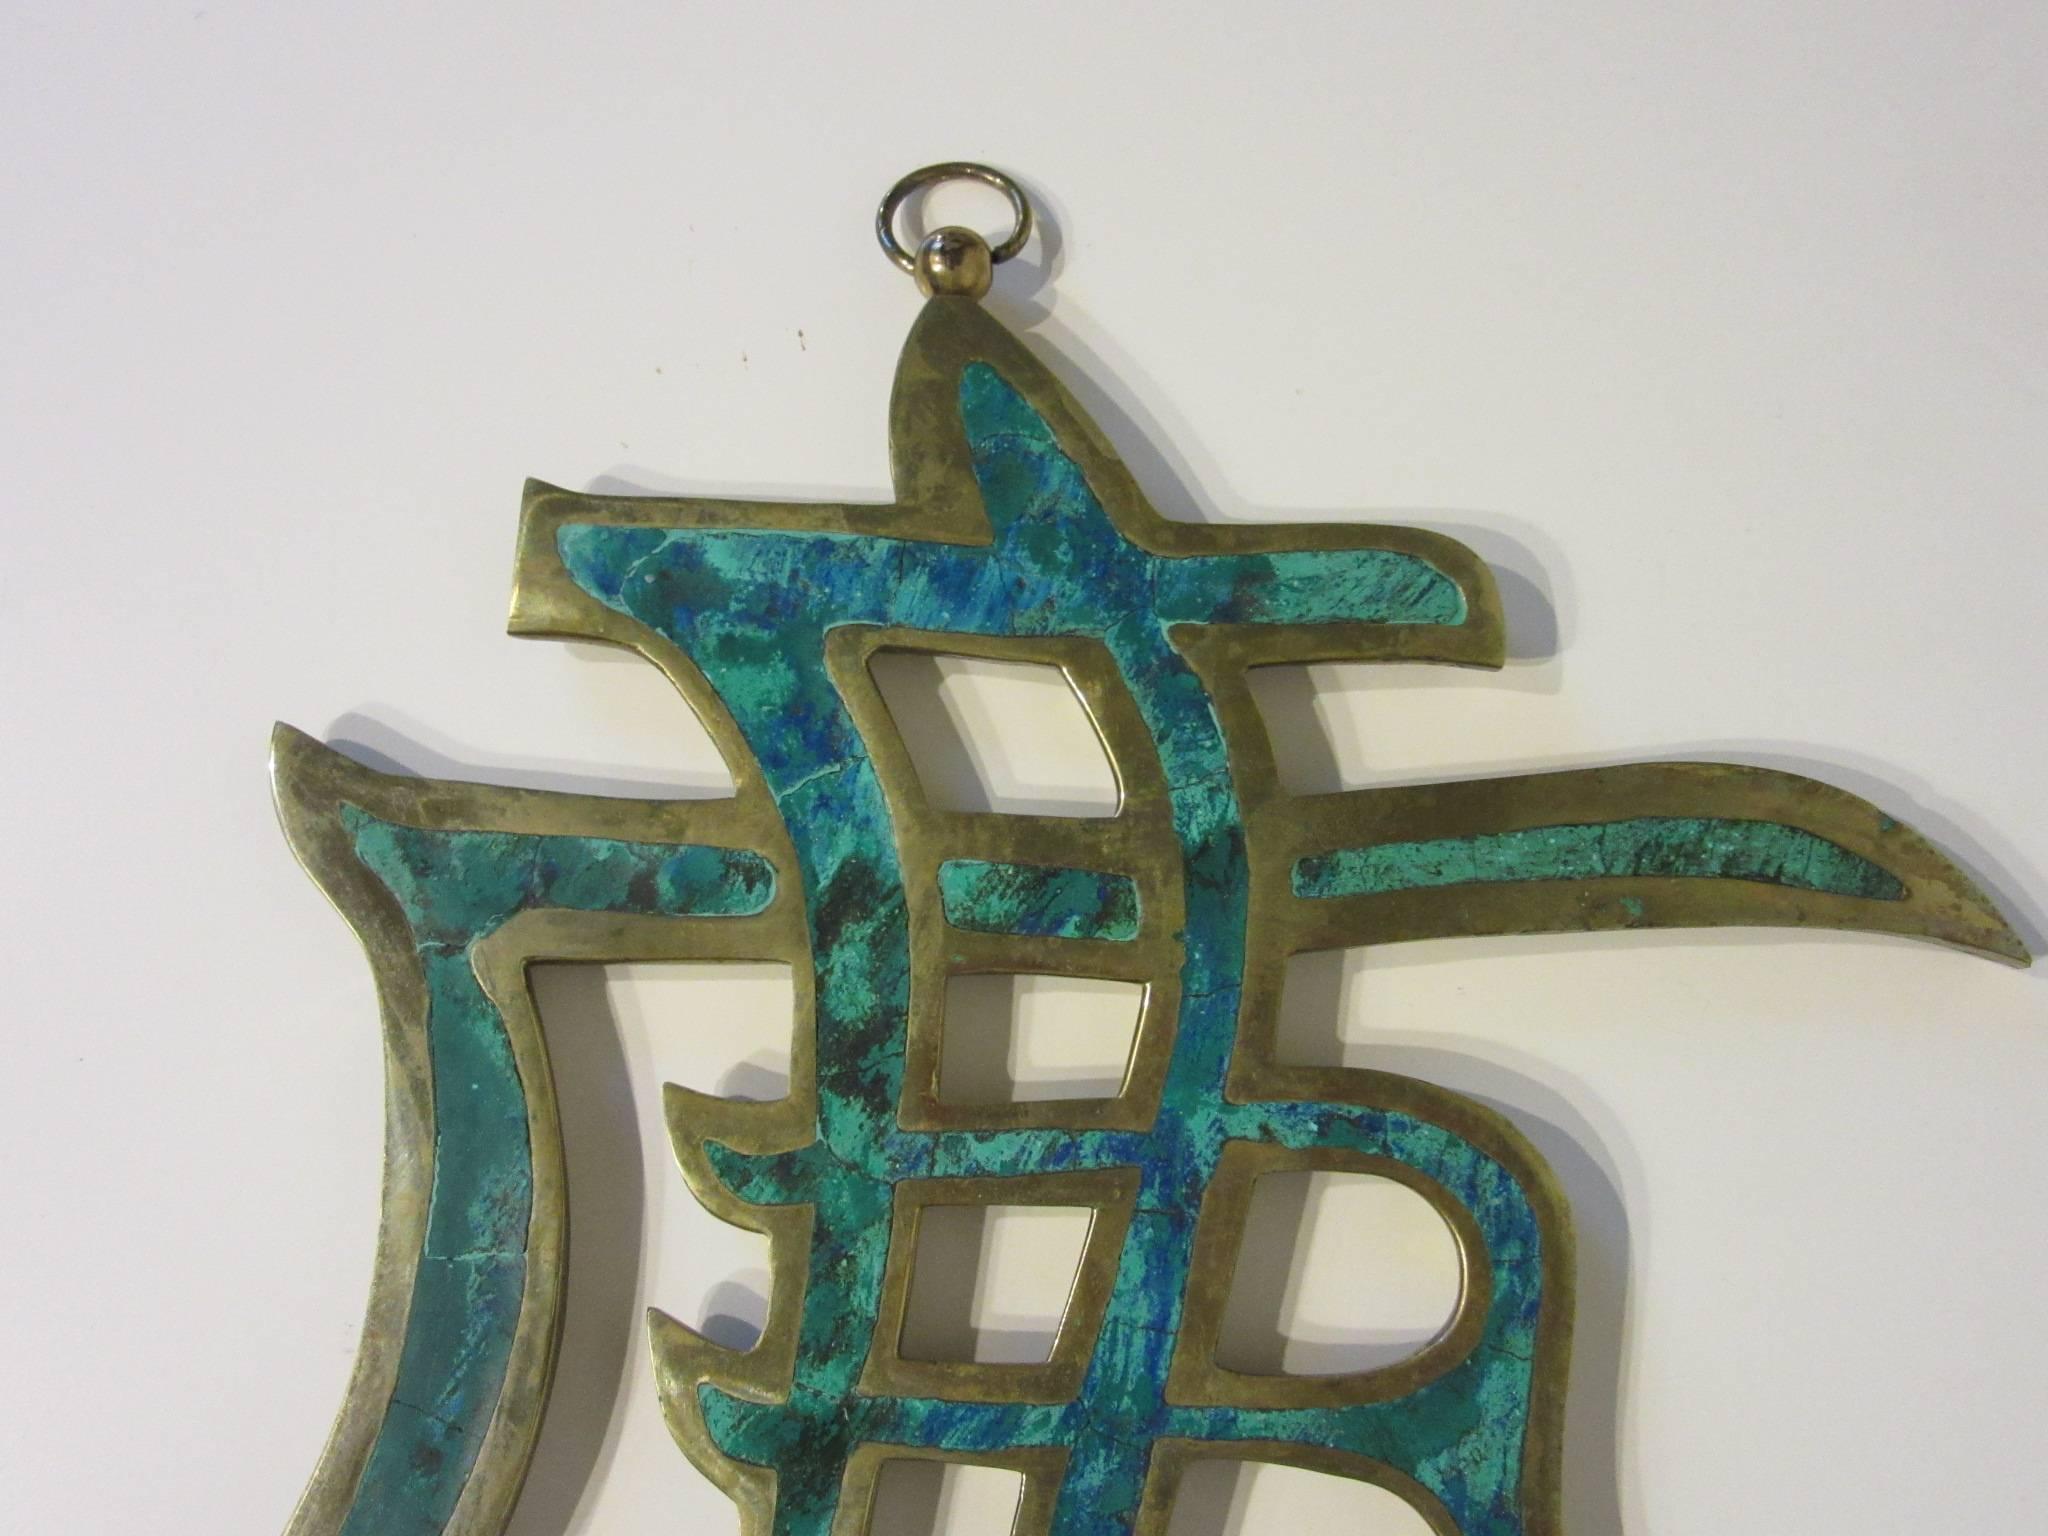 A brass and malachite handcrafted hanging wall ornament with inlay stone, hanger and retains the label 